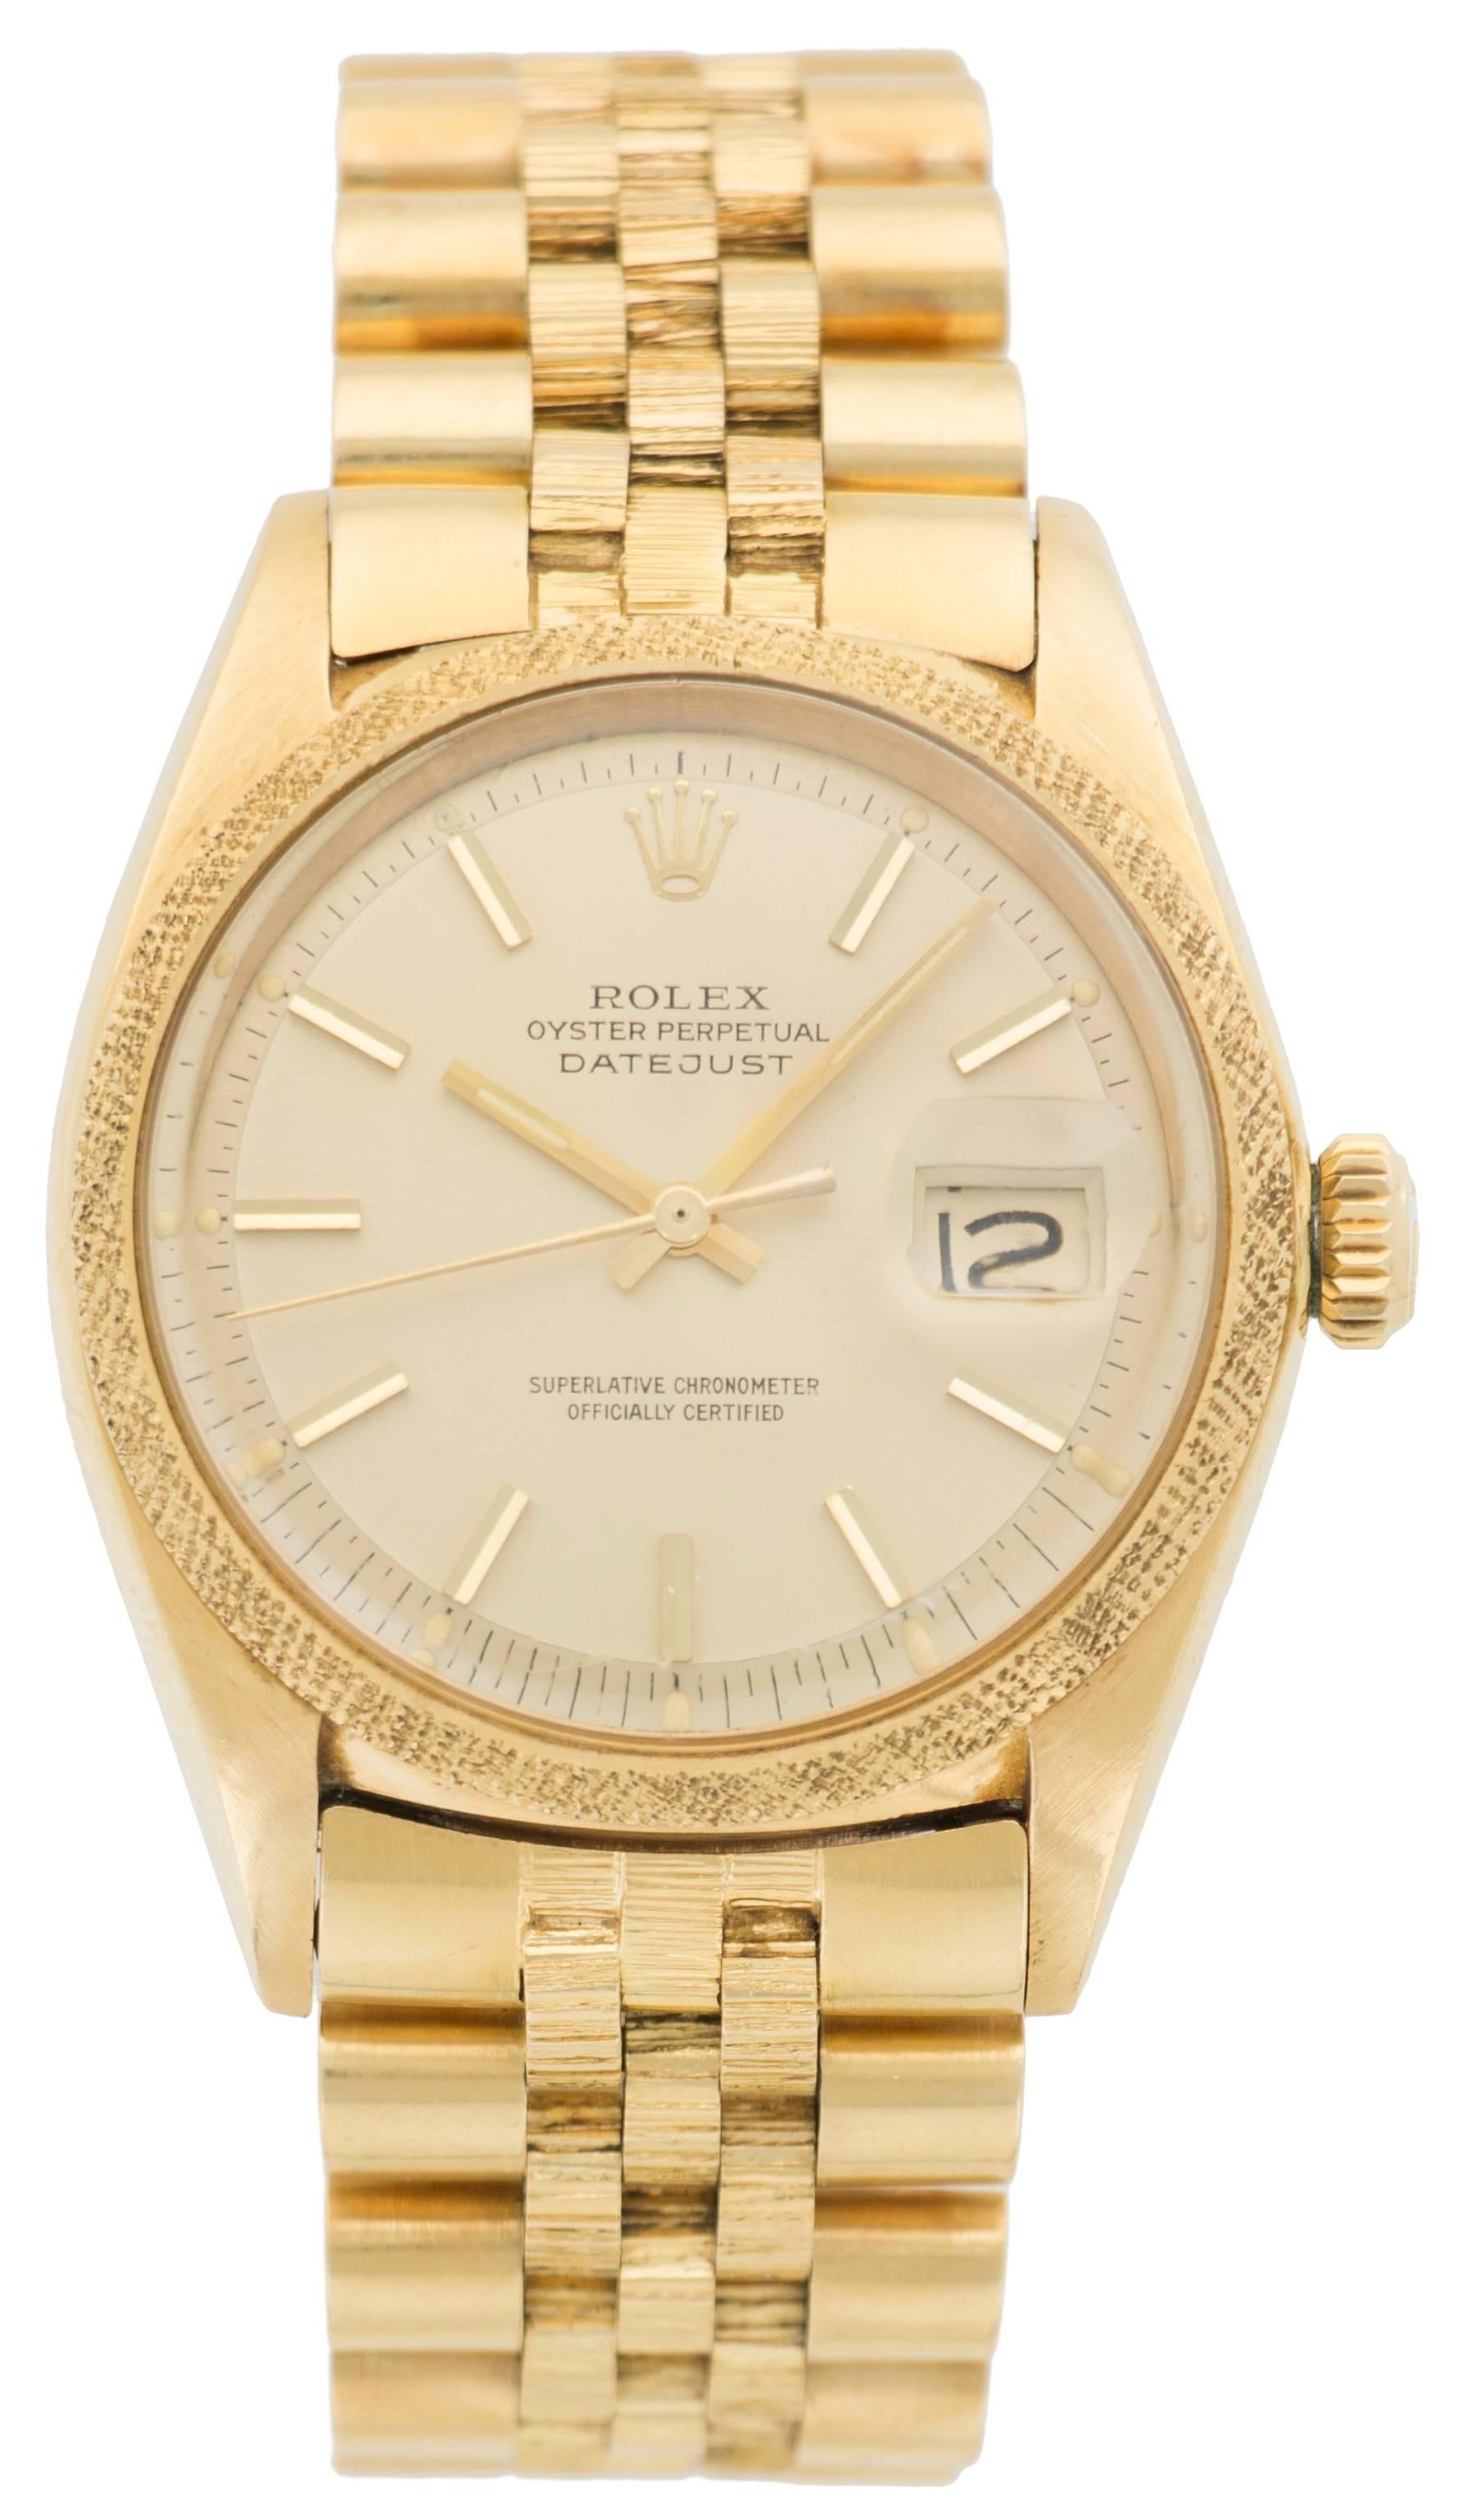 This yellow gold Rolex Datejust features a rare 